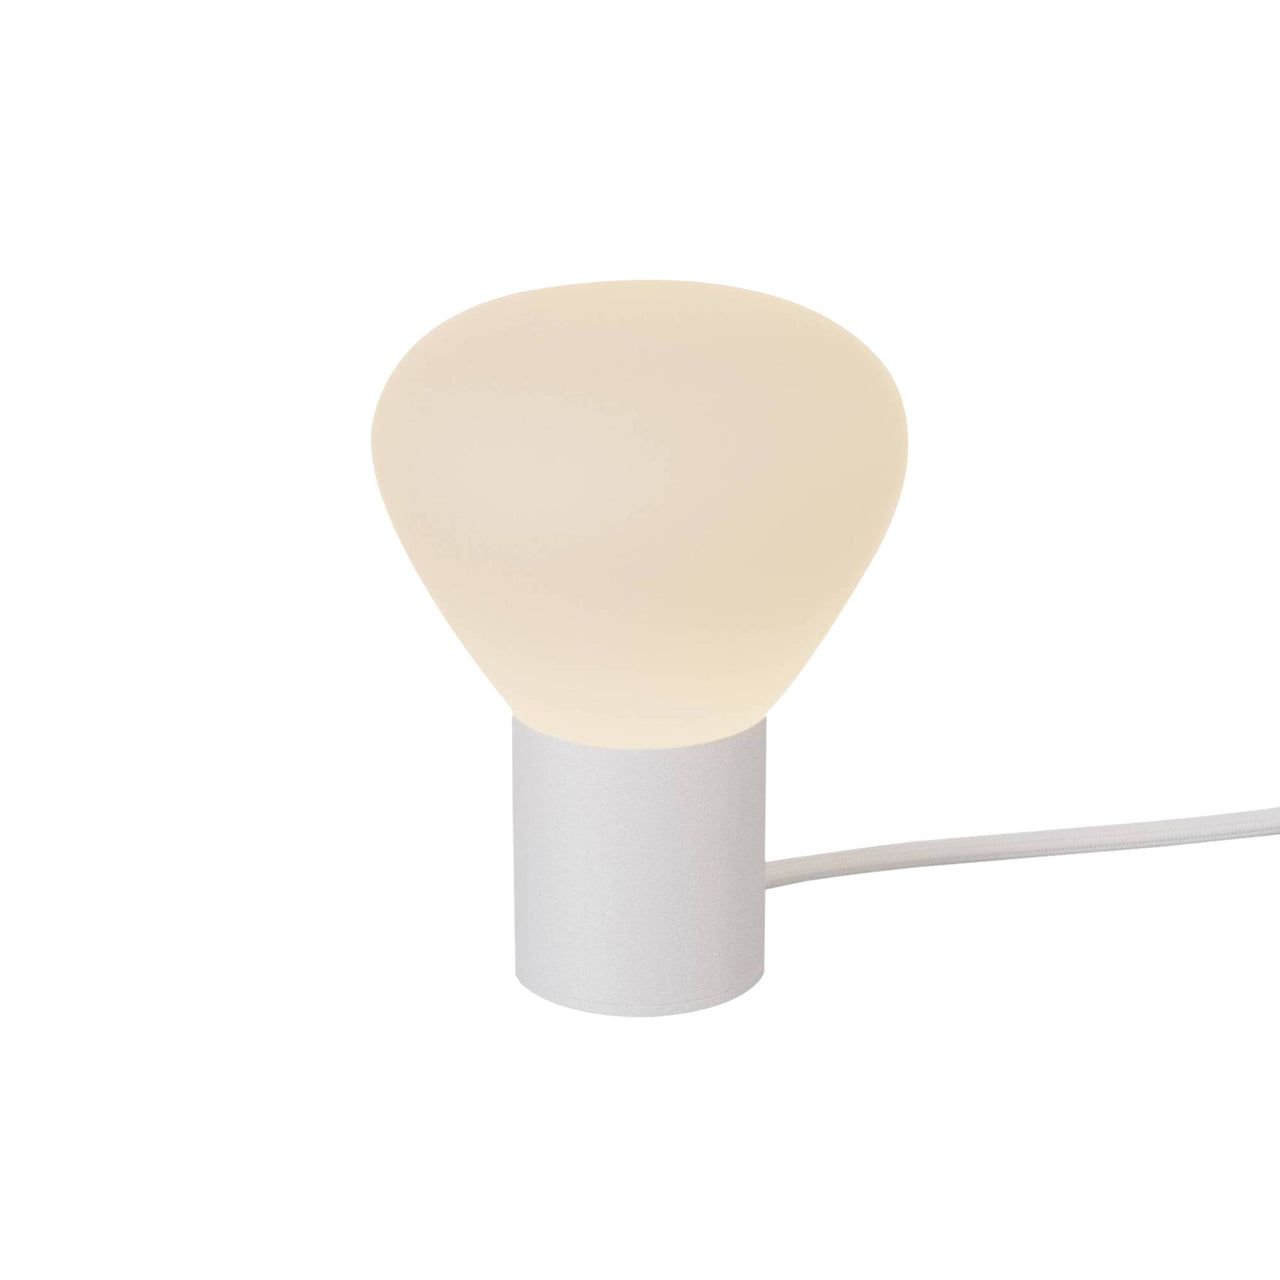 Parc 01 Table Lamp: Handswitch + White + White